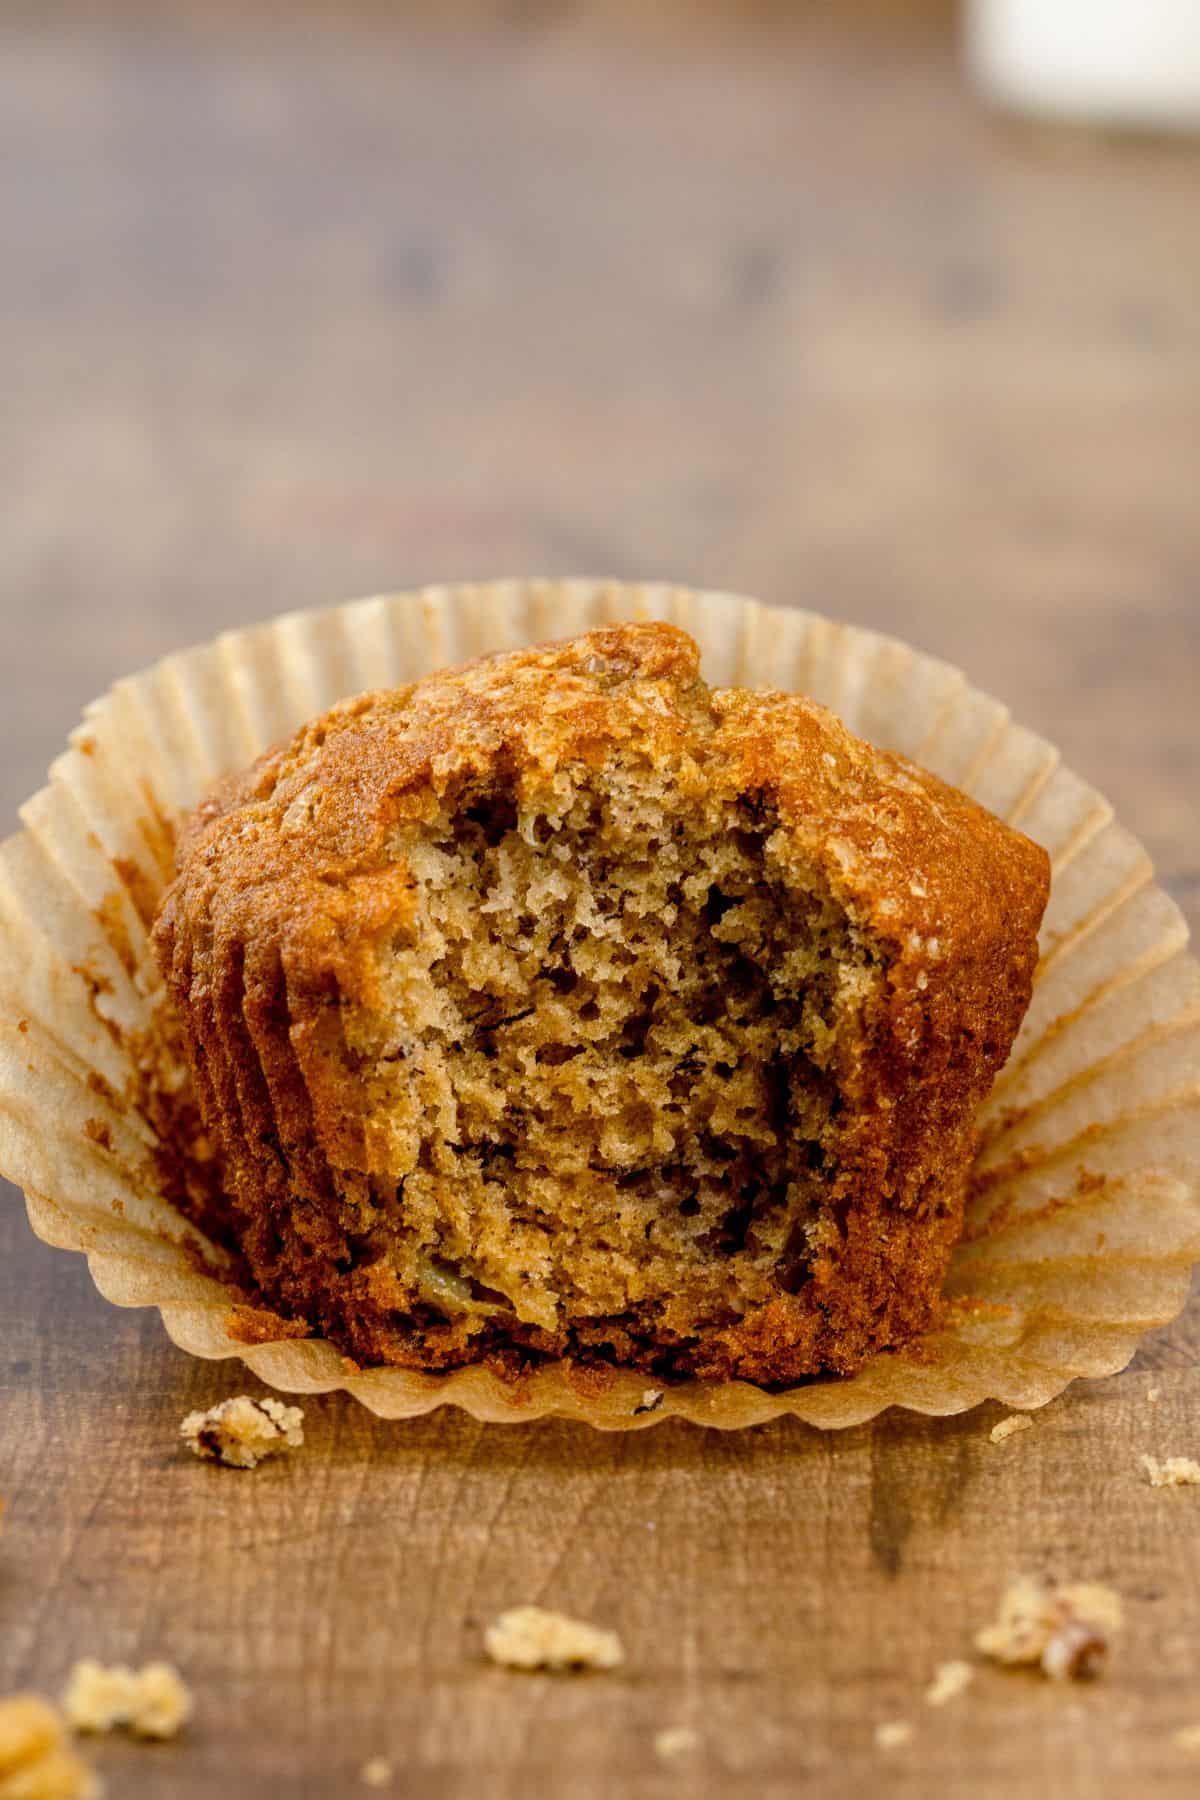 a partially unwrapped gluten free banana muffin with a bite taken out of it so you can see the fluffy inside texture of the muffin